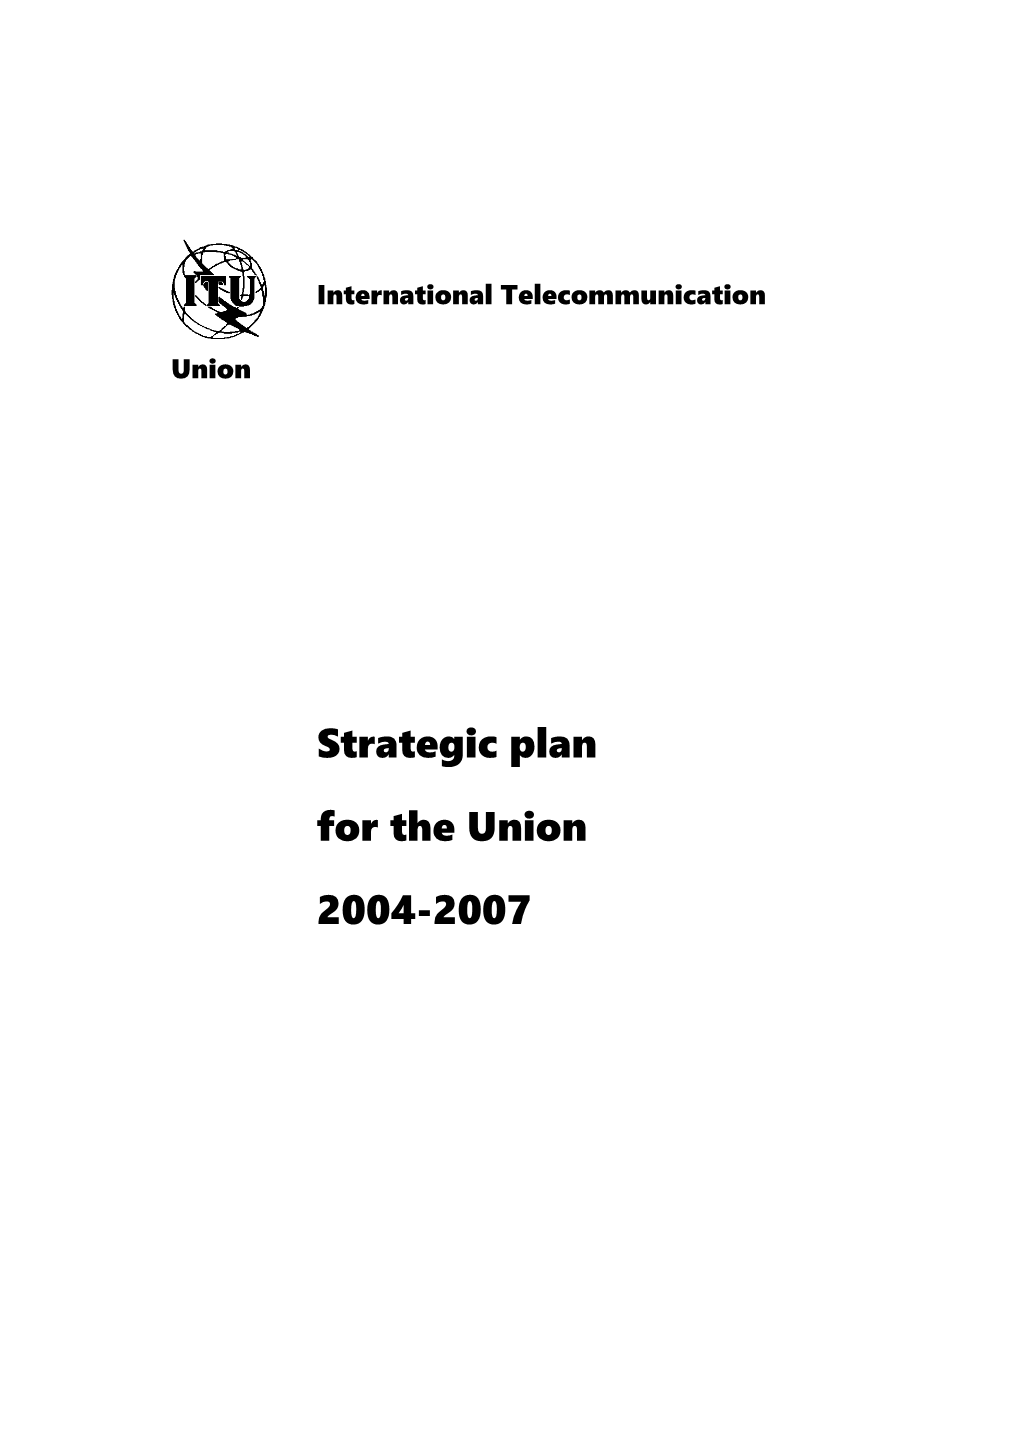 Strategic Plan for the Union 2004-2007